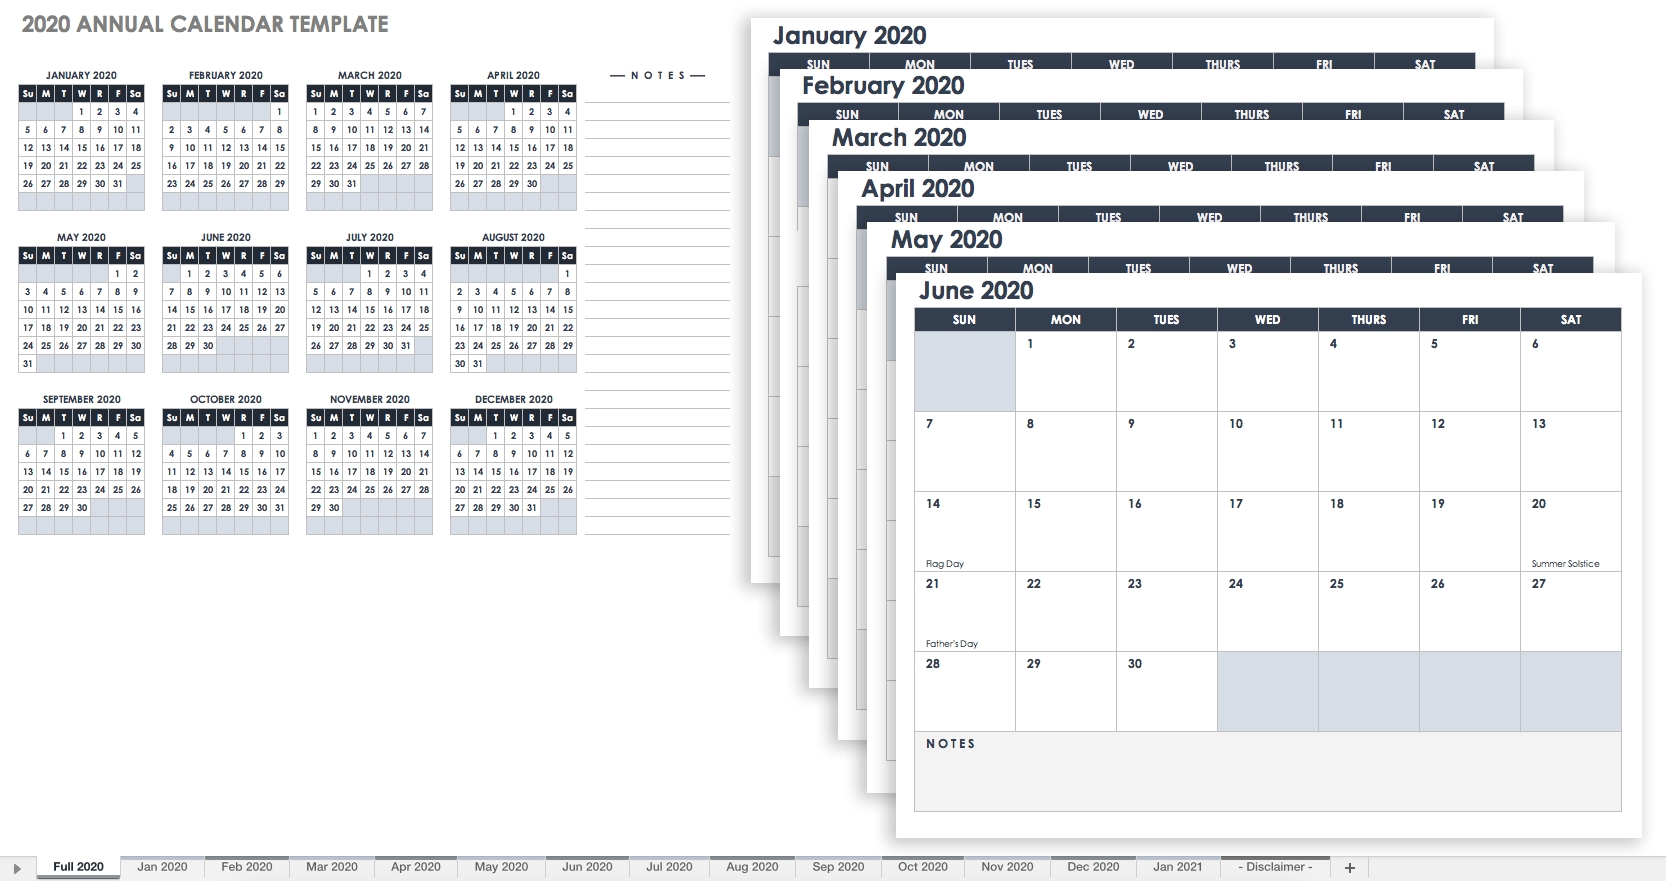 Free Excel Calendar Templates-12 Months To View Monthly Calendar